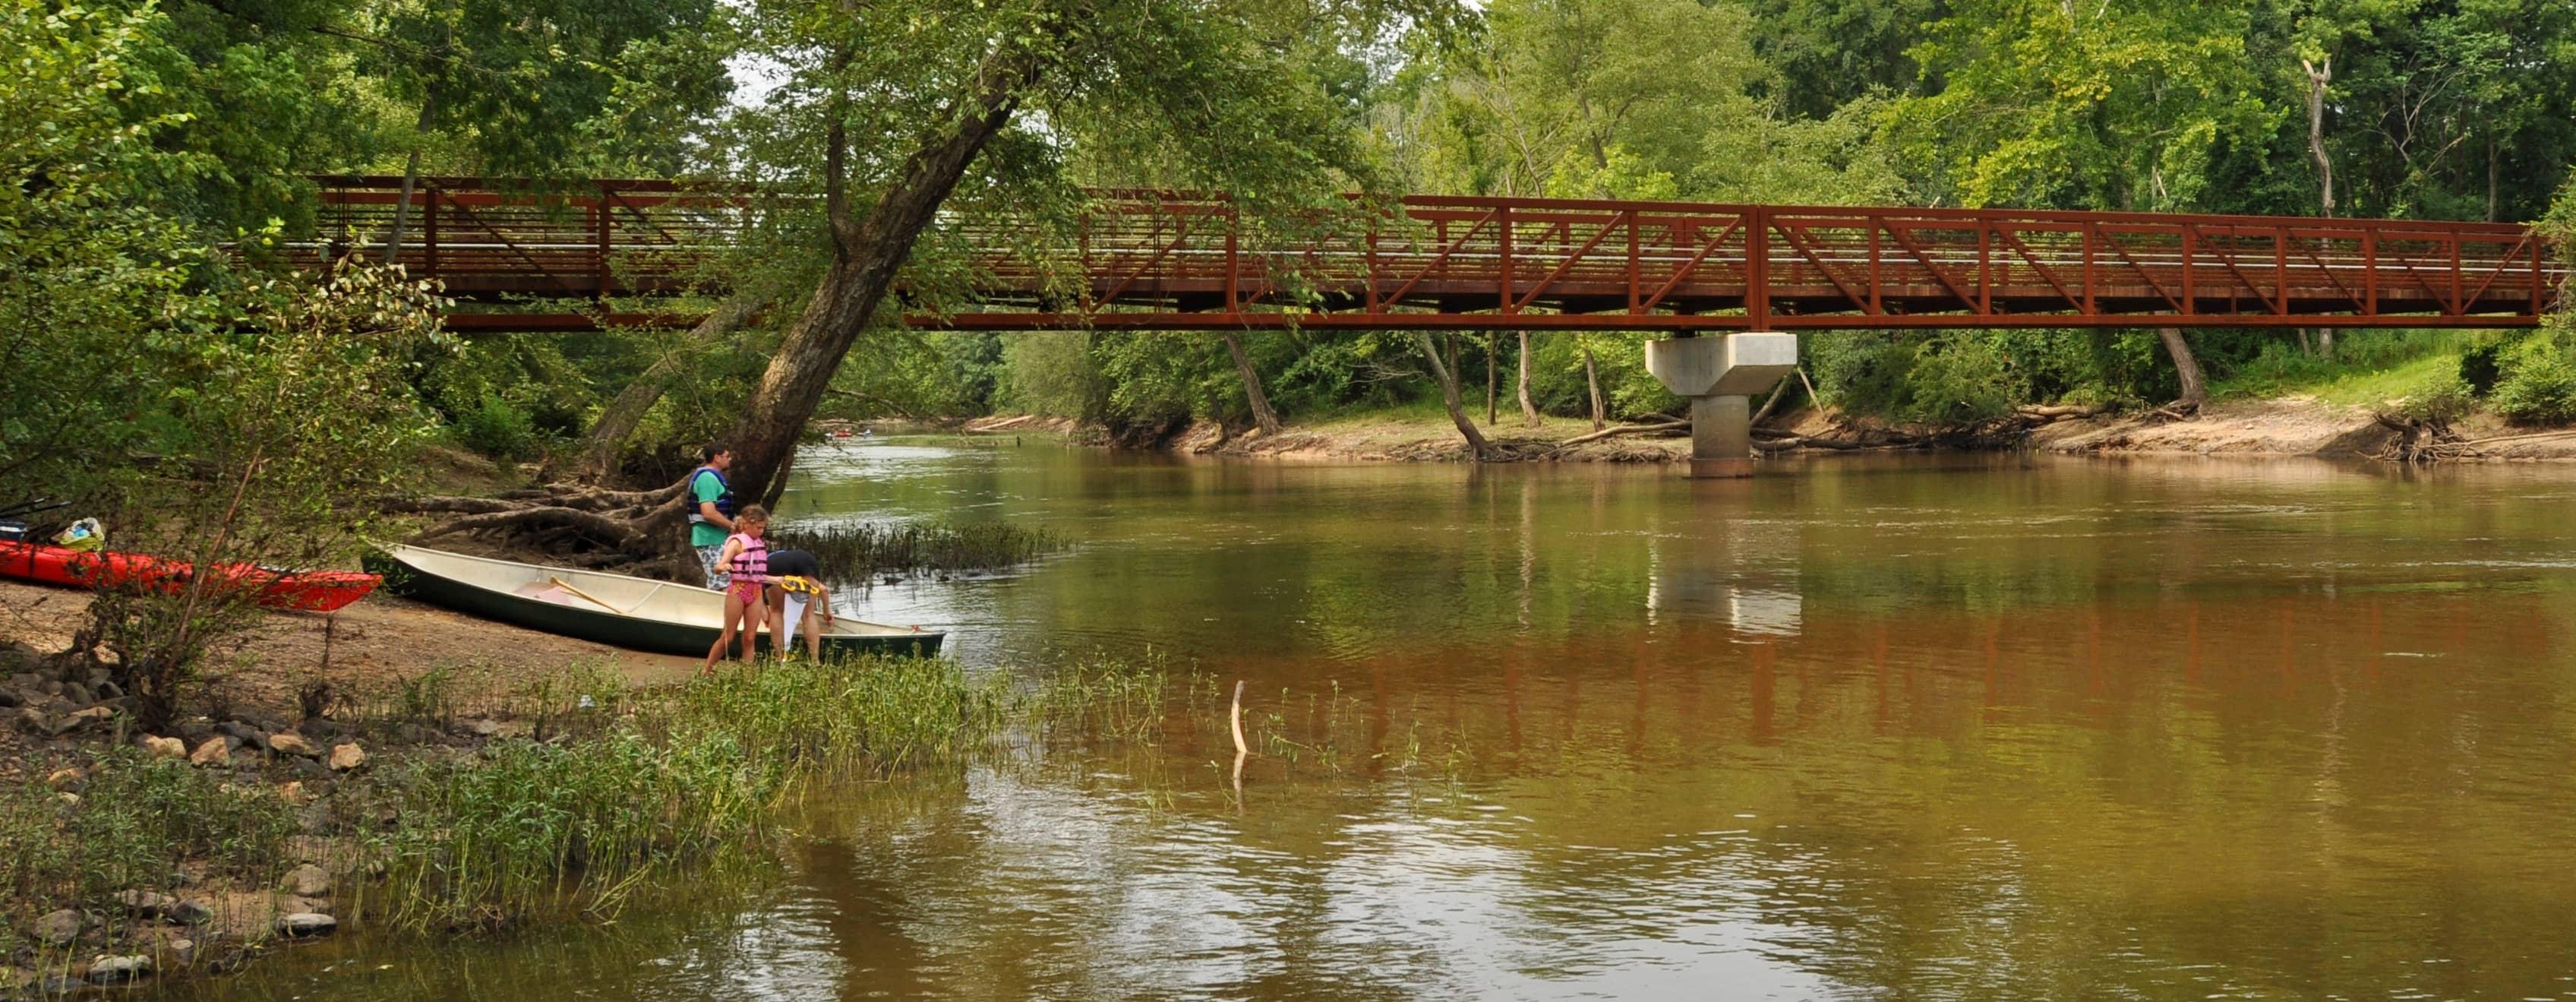 A metal bridge spans a river with brown tinted water. On the shore of the river a child and two adults are next to a green canoe and red kayak, the child has a pink life vest on. The river is surrounded by green trees and aquatic vegetation grows along the shore.